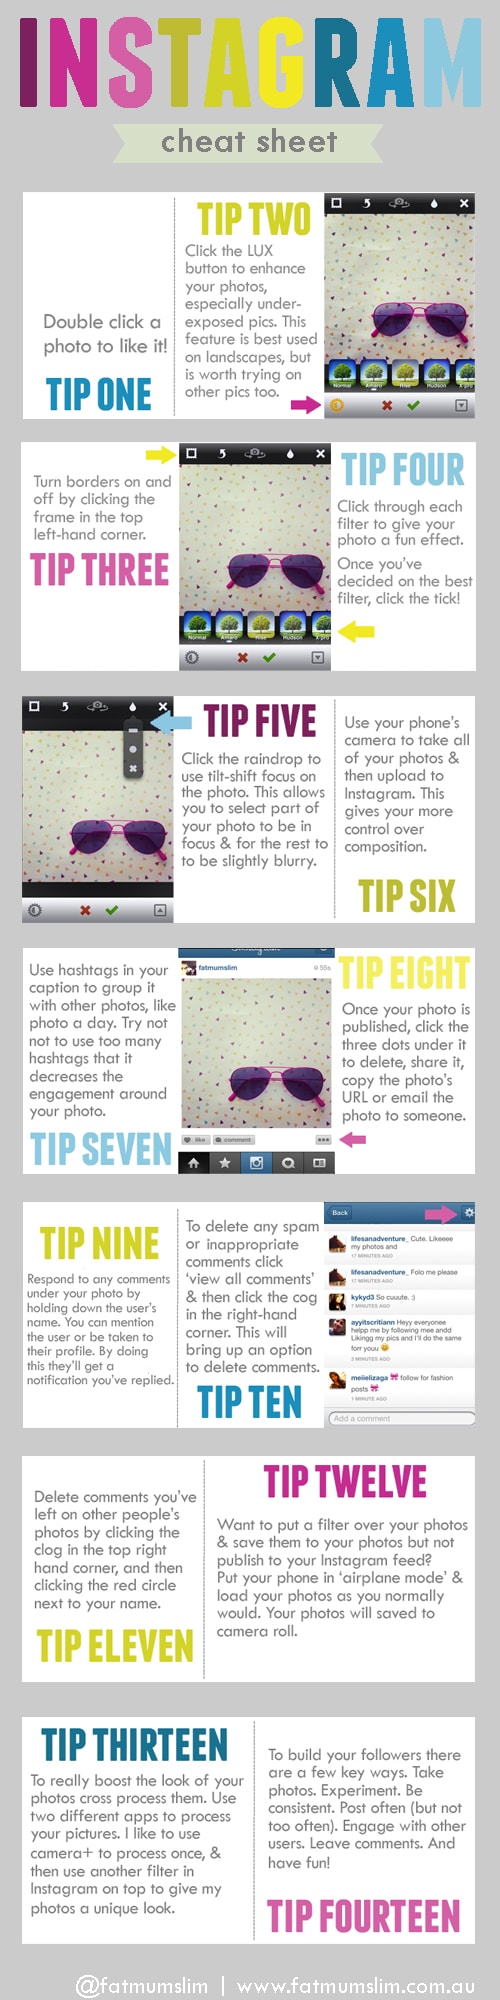 Instagram Cheat Sheet: 14 Tips To Master It All [Infographic]